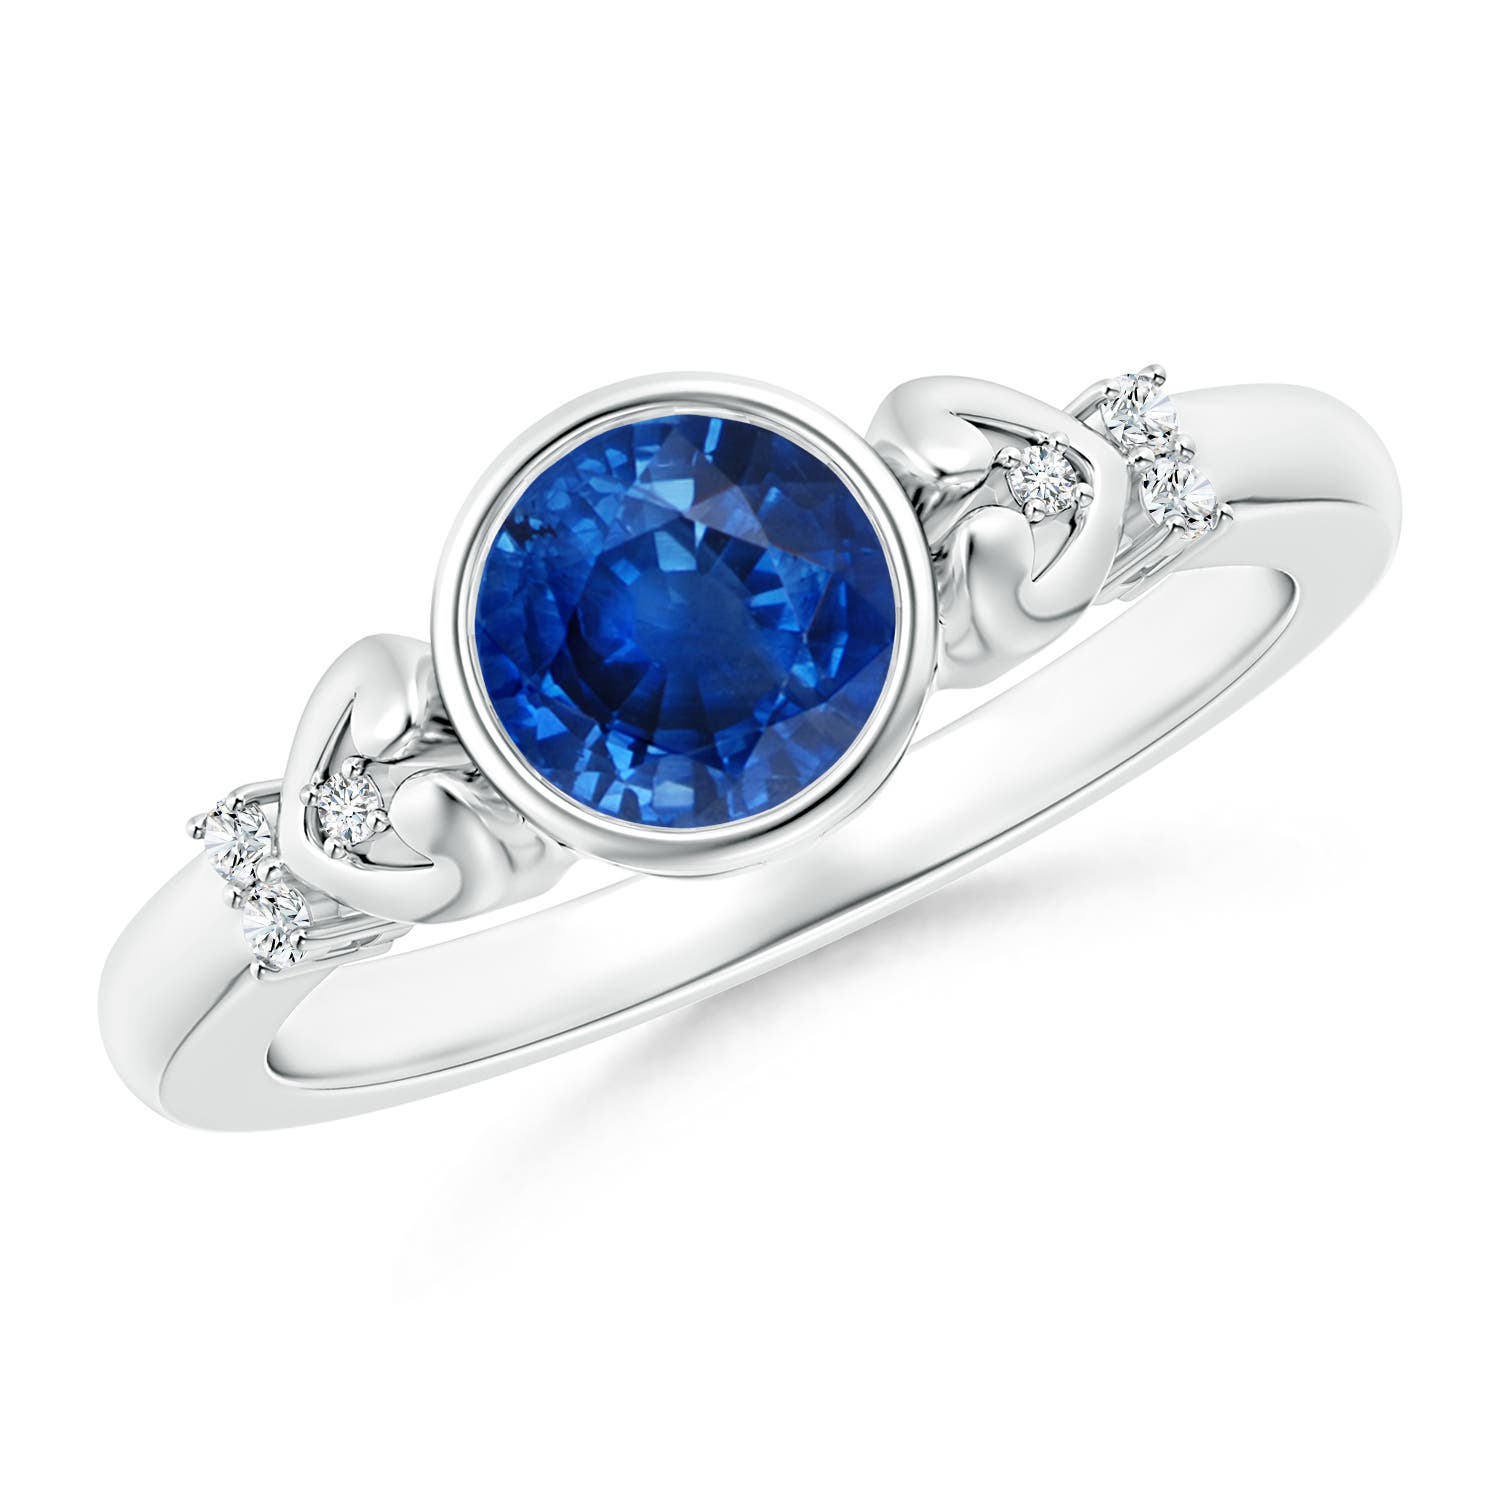 AAA - Blue Sapphire / 1.05 CT / 14 KT White Gold